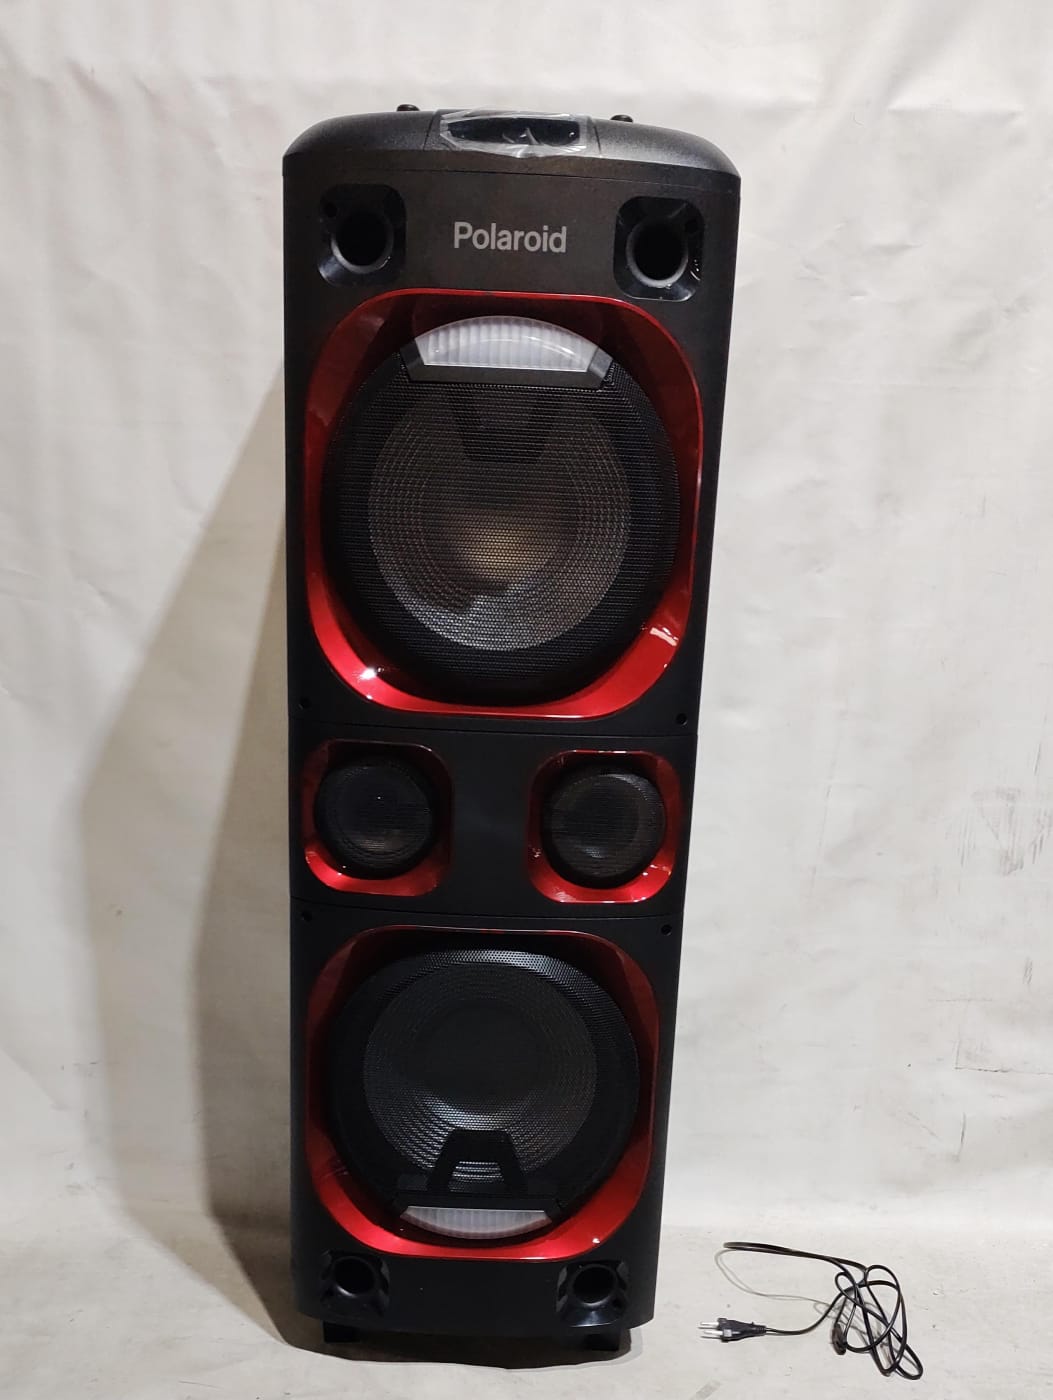 Parlante polaroid bt 12 wireless party tower [Openbox]